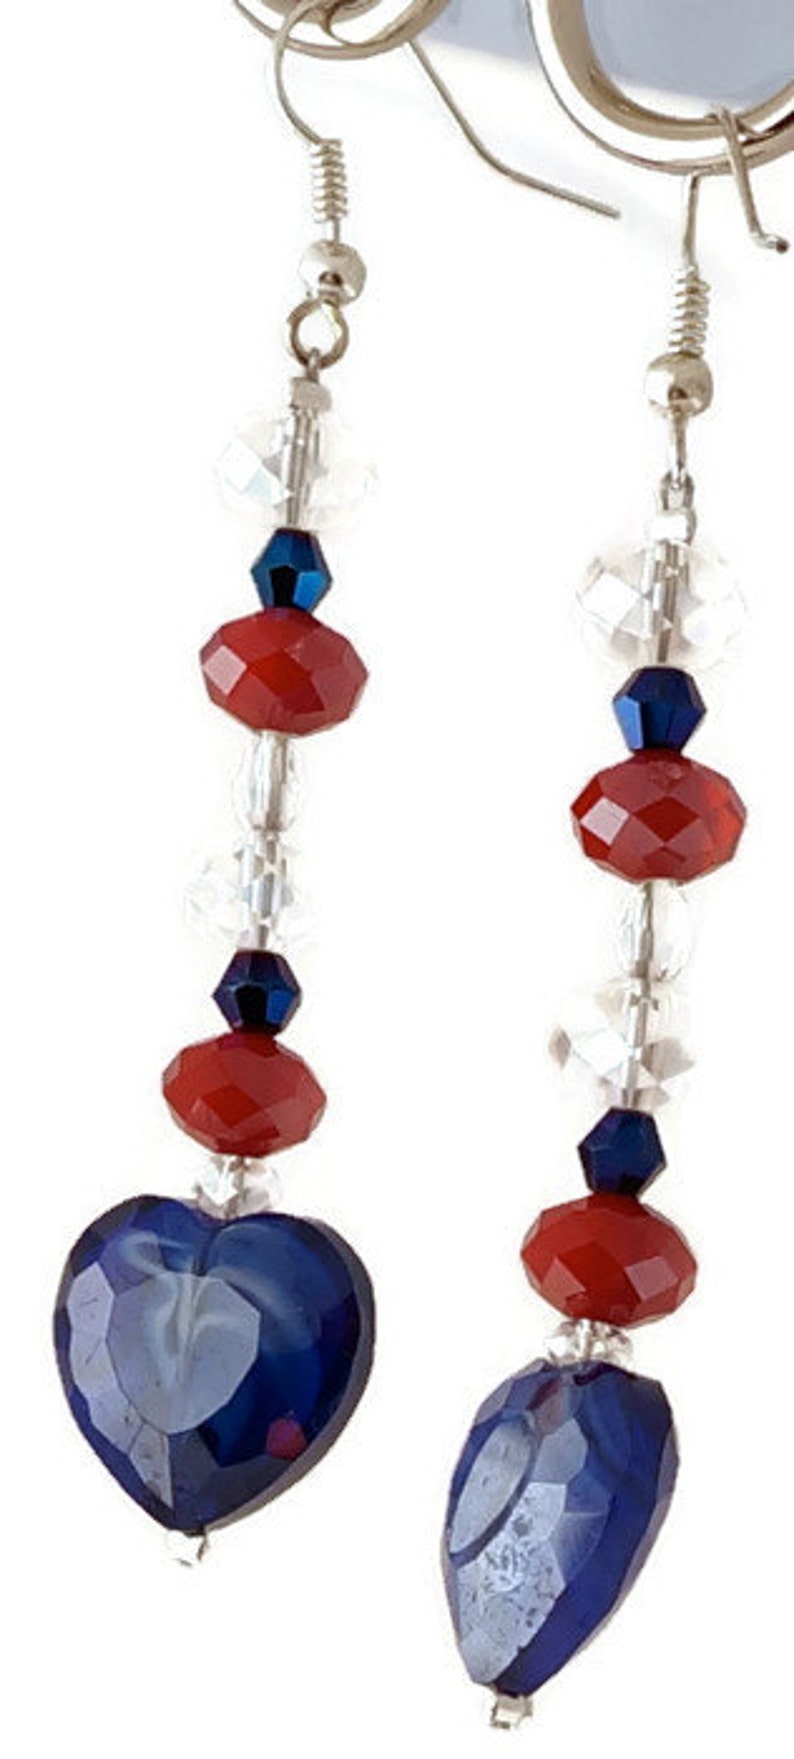 Patriotic Jewelry / July 4th Jewelry/ Red,White and Blue Bracelet, Earrings in Crystals and glass bead heart/ Holiday Jewelry image 5